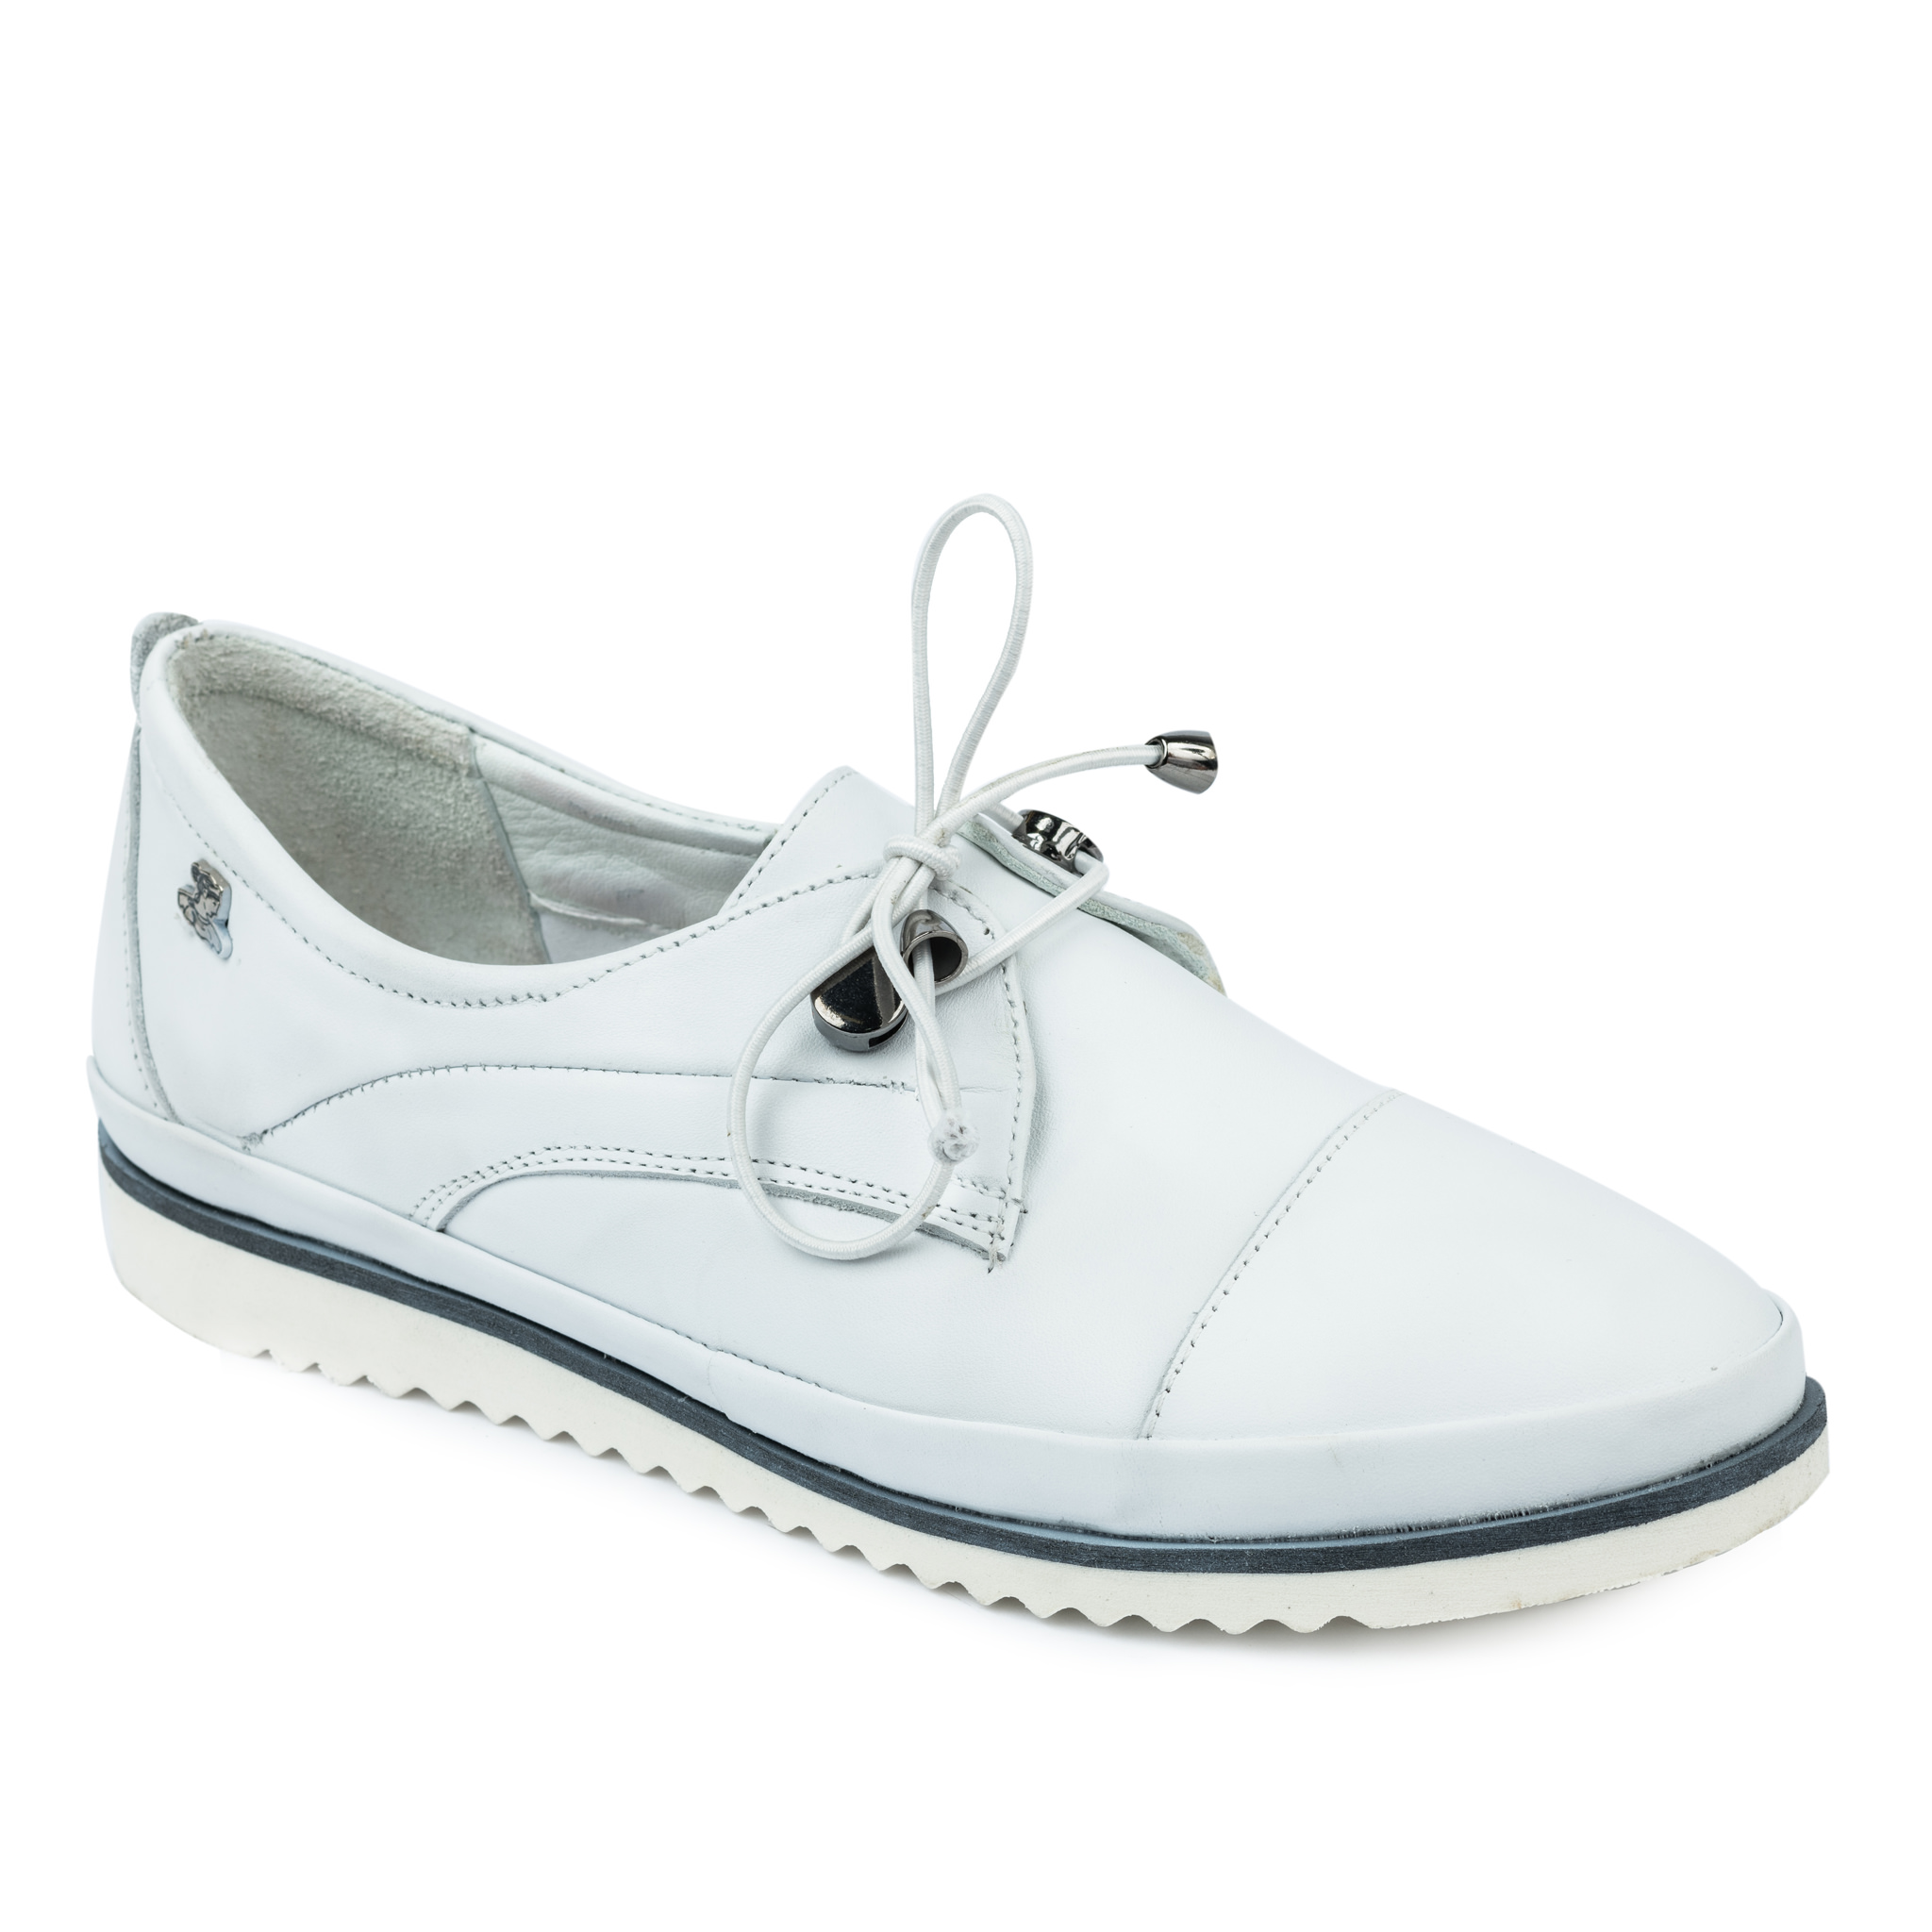 Flat leather shoes A566 - WHITE